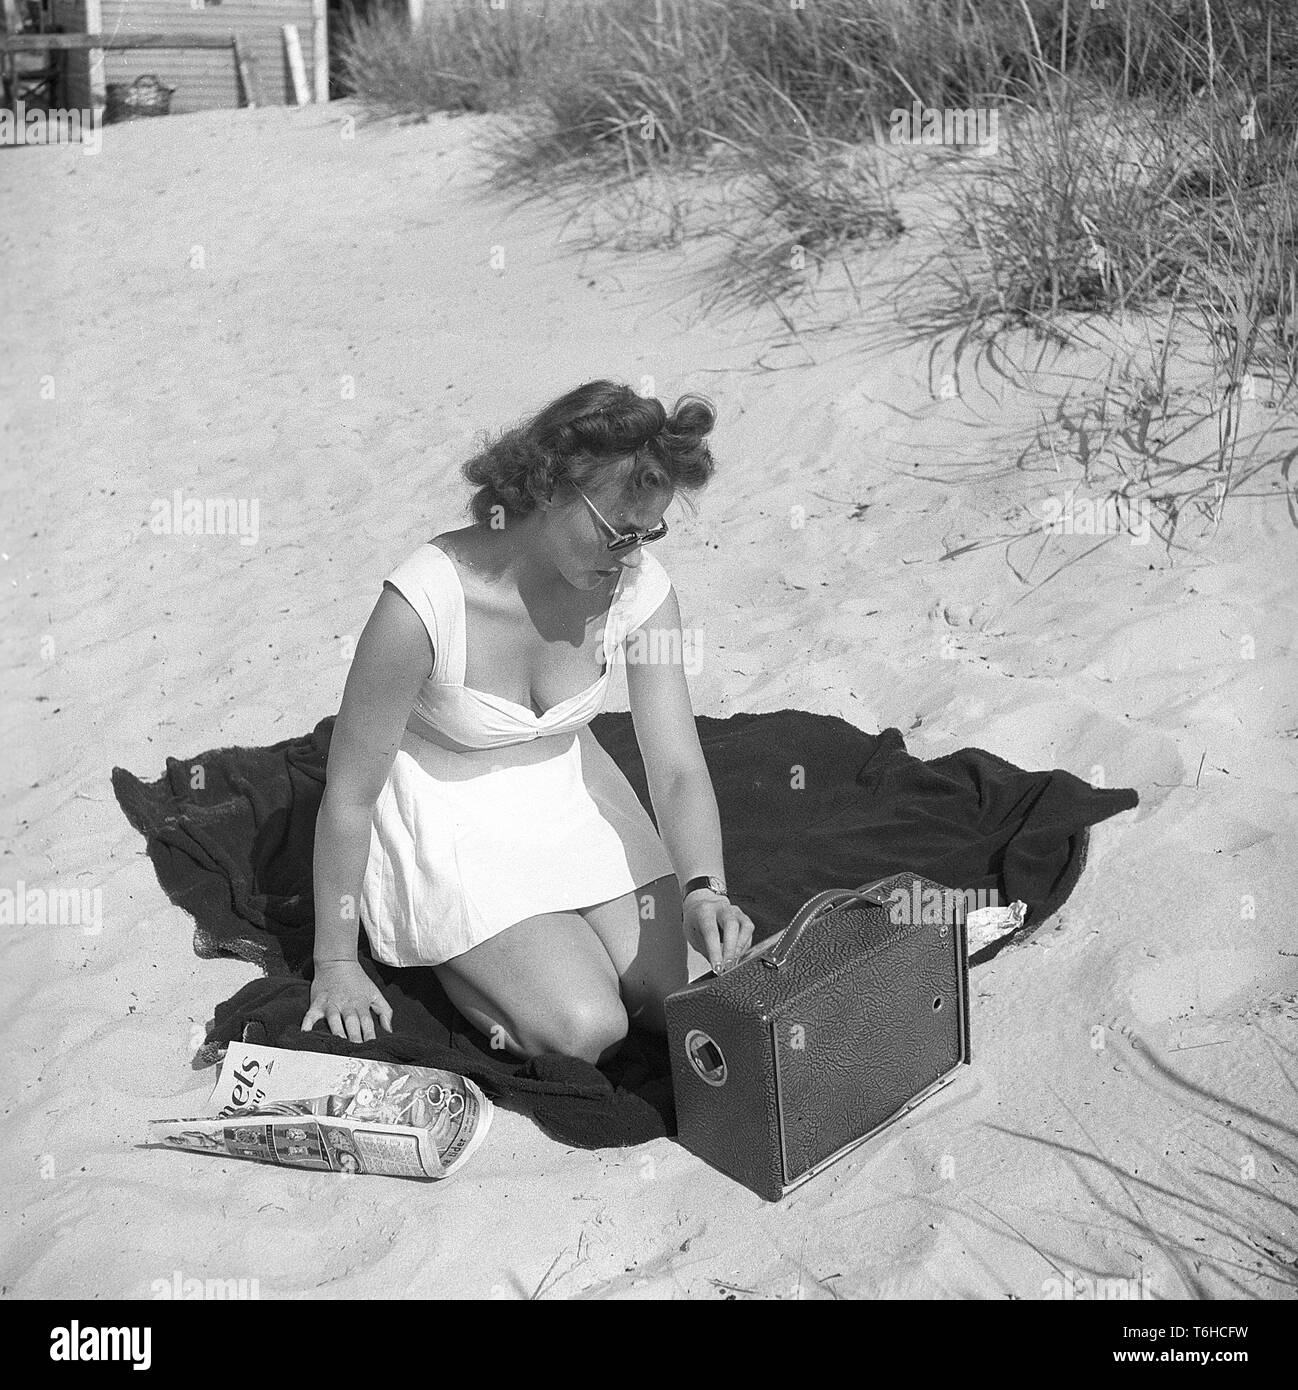 1940s woman on the beach. While the WW2 has hit Europe people are enjoying themselves on the beach of Falsterbo in Sweden. A young woman has brought along a battery operated radio and adjusts the reception on it to listen. The radio was the most important source of information about the war and everybody followed the news broadcasts. Sweden July 1941. Photo Kristoffersson ref 209-14 Stock Photo